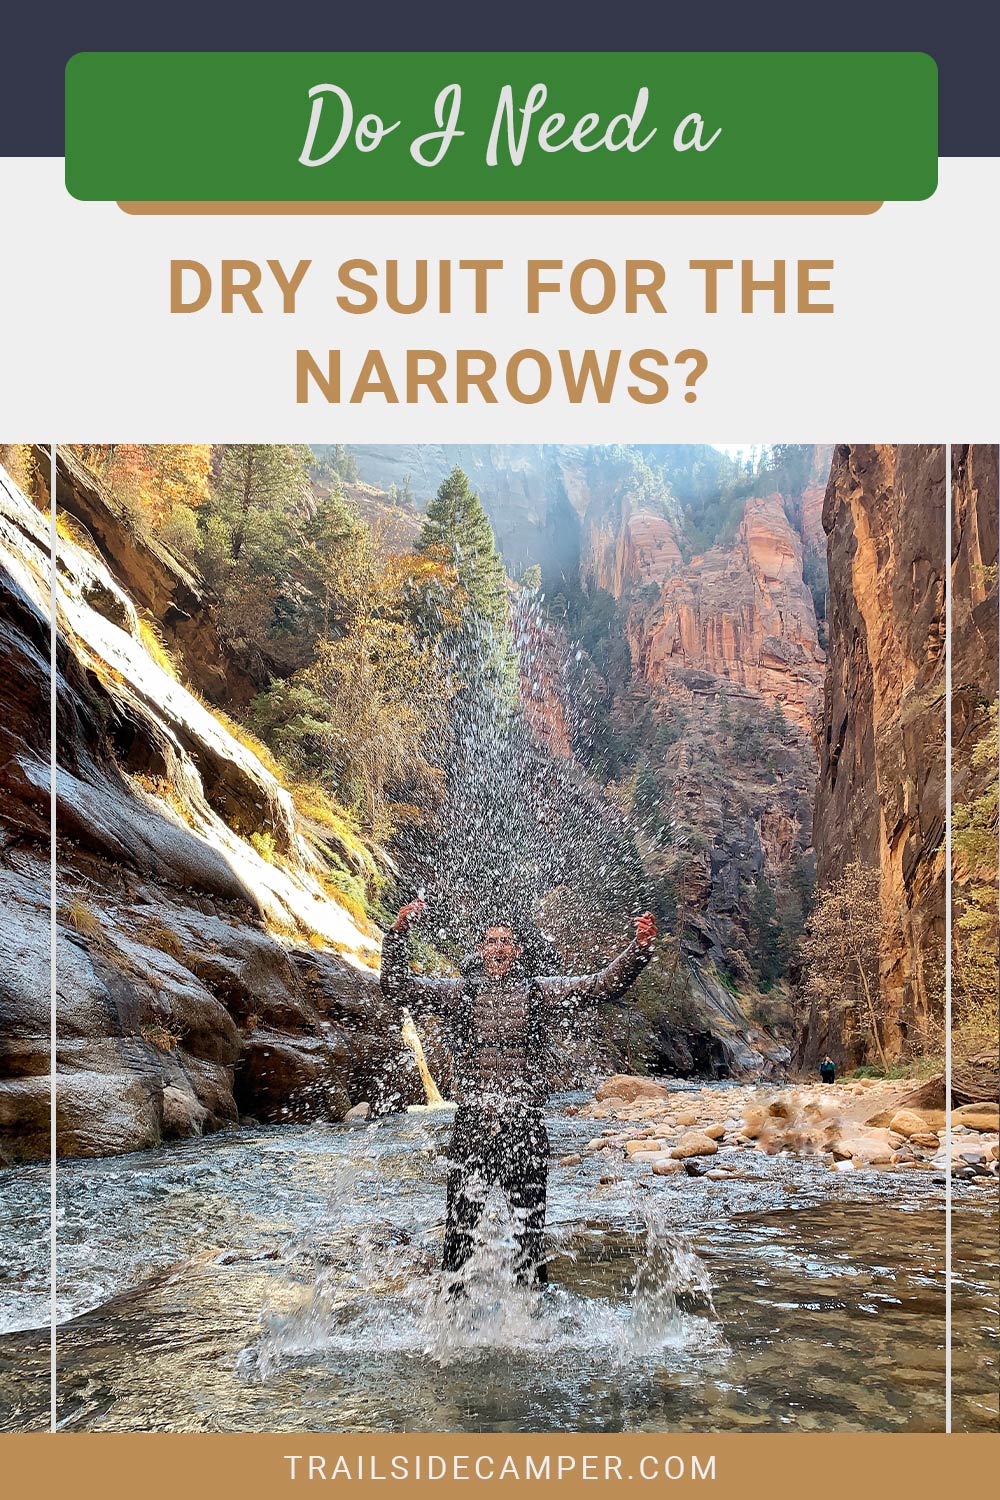 Do I Need a Dry Suit for the Narrows?